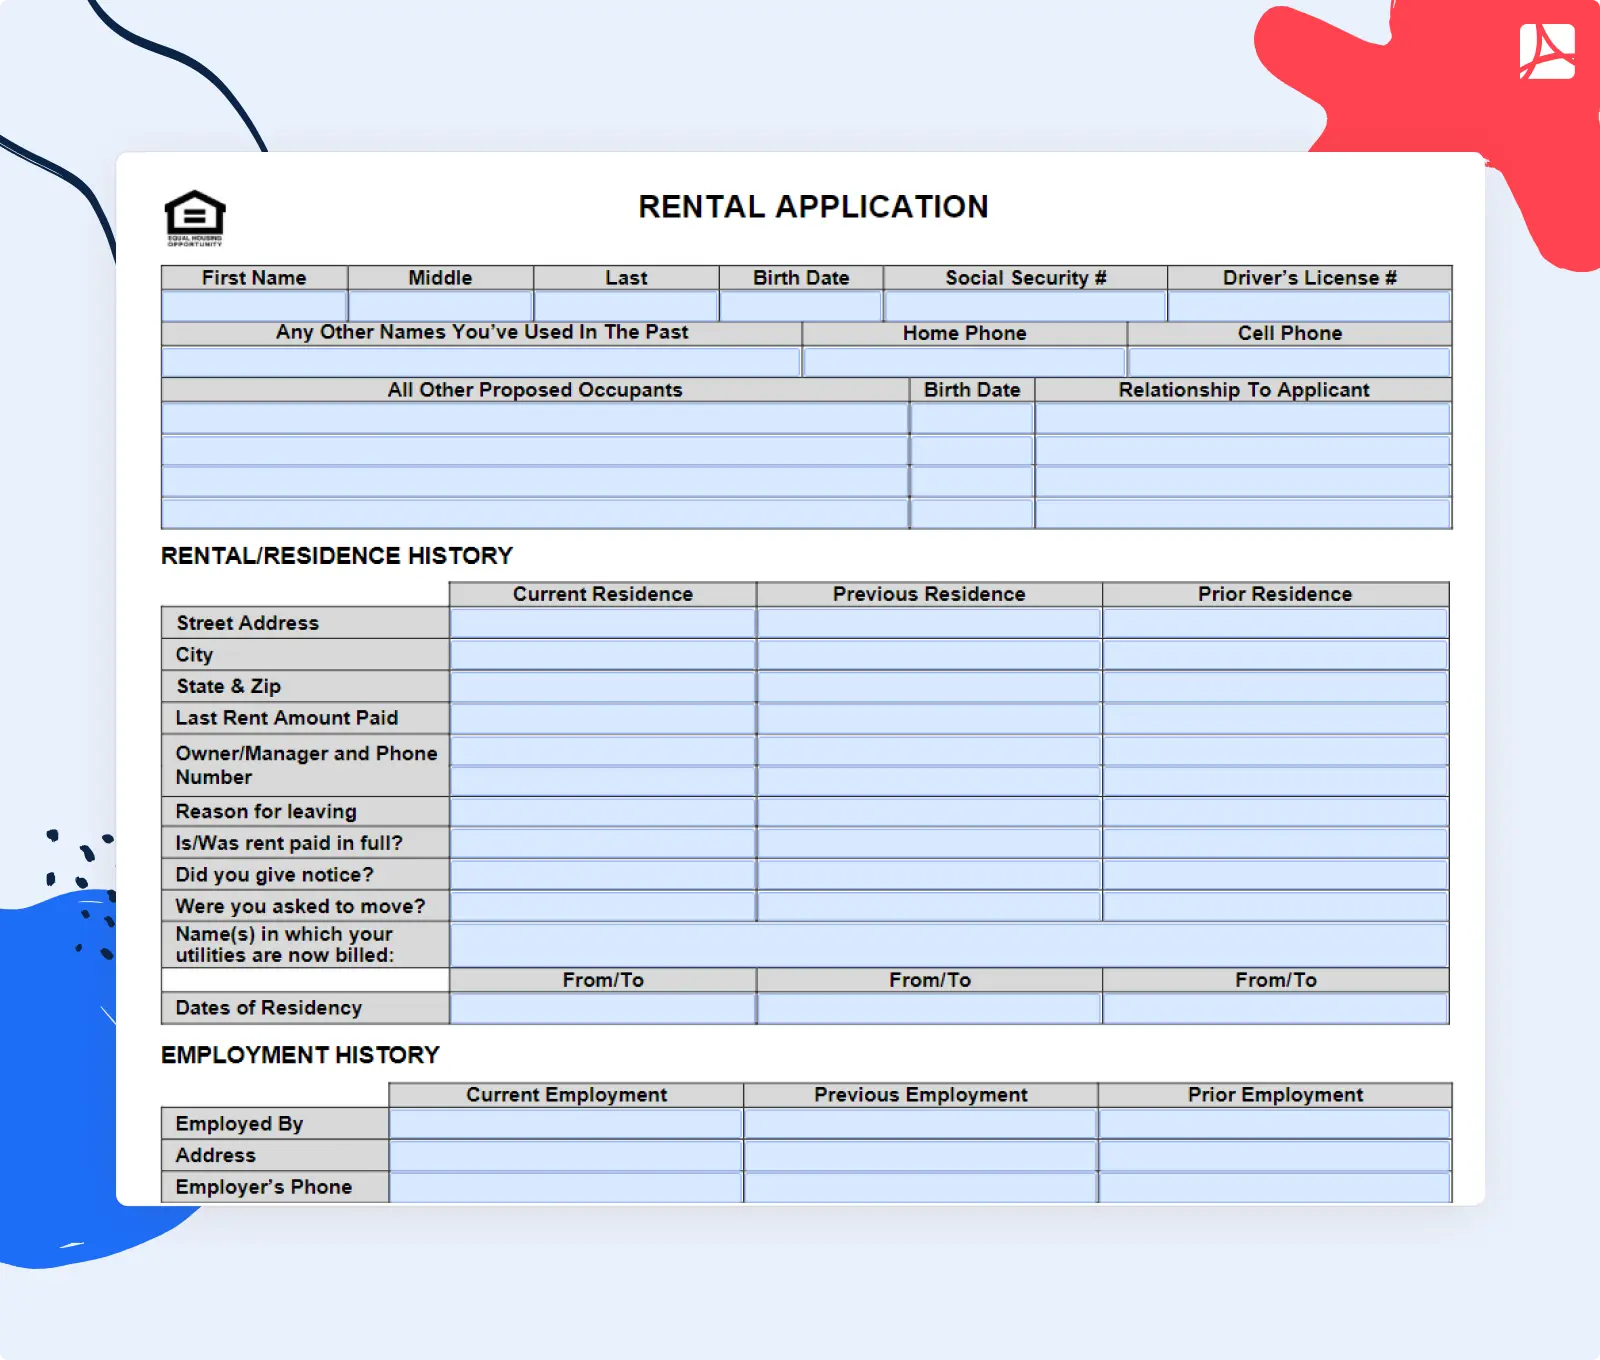 Filling Out a Standard Rental Application